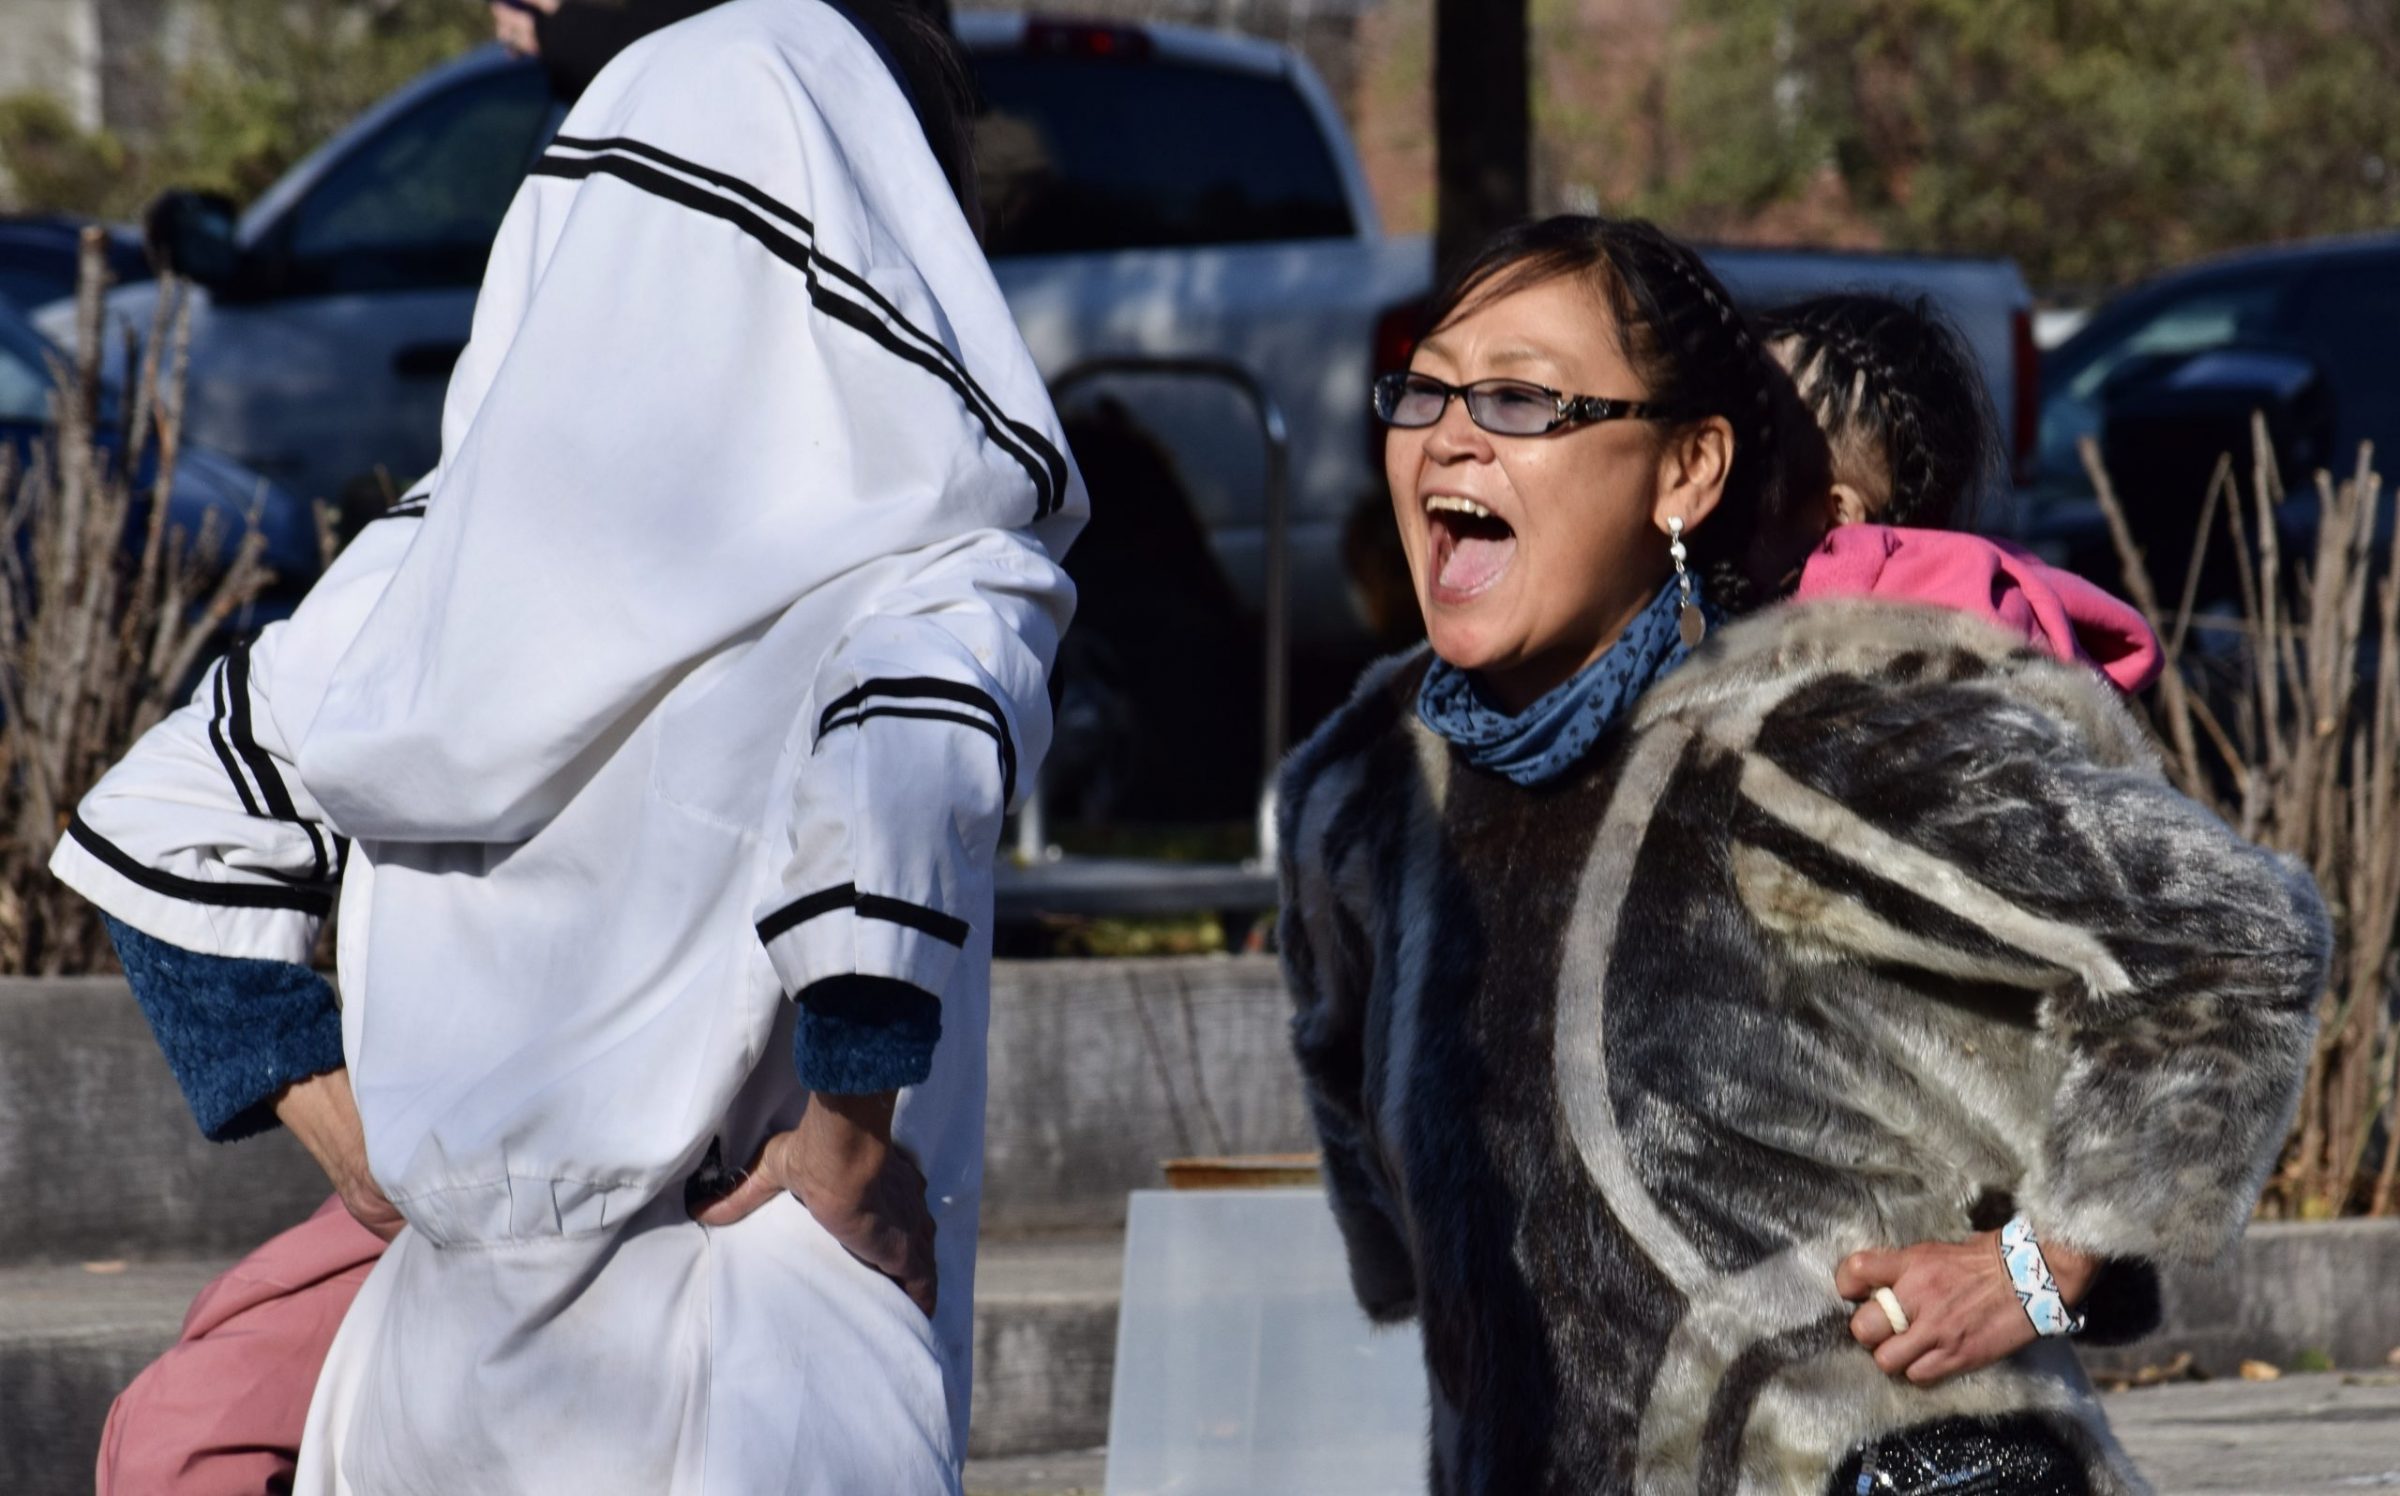 Members of the Tununiq-miut Theatre perform a traditional Inuit song and dance at the official opening of Annie Pootoogook Park in Ottawa on Nov. 7. The ceremony honouring the late artist coincided with International Inuit Day. From left: Sarahme Akoomalik, Sheena Akoomalik and Rosalyn Katsak (on back). (Photo by Madalyn Howitt)